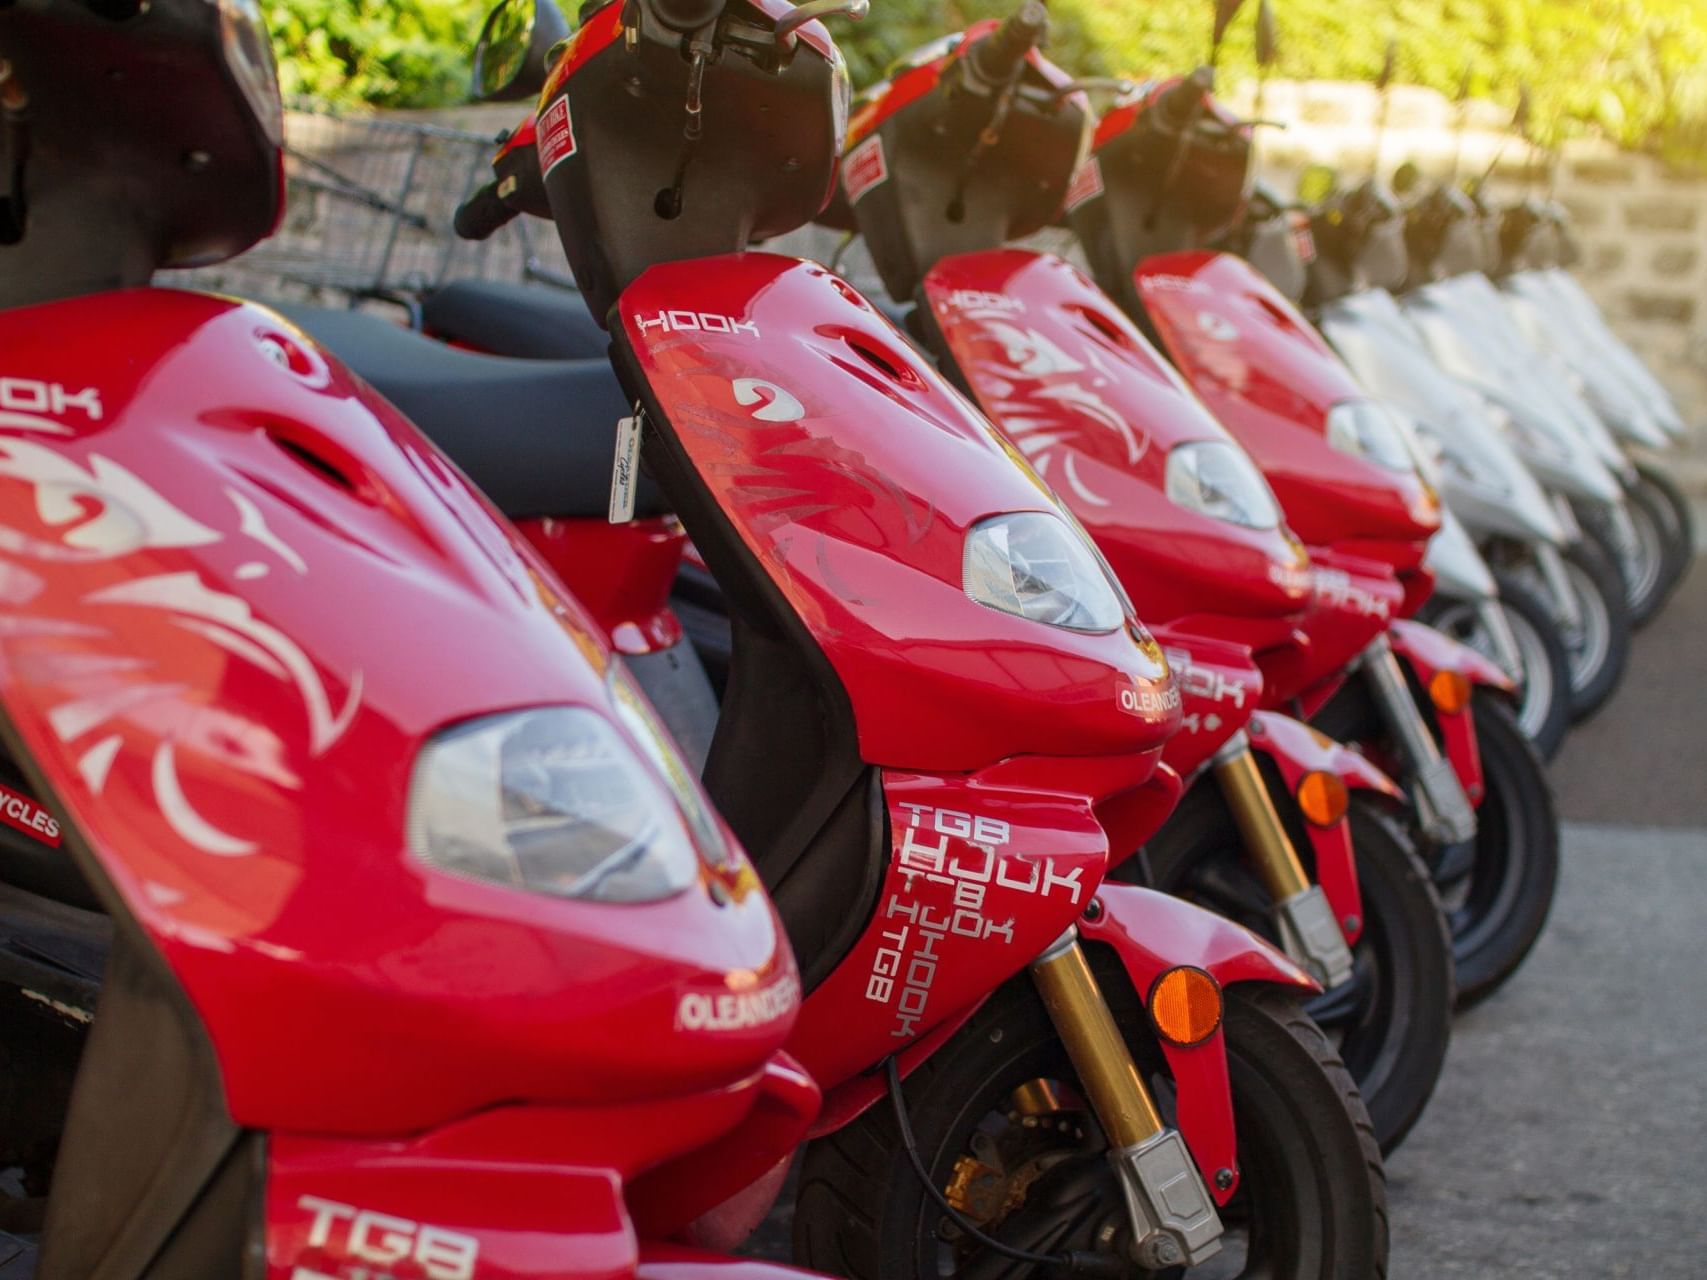 Red & white motorbikes lined at St George's Club Bermuda Hotel